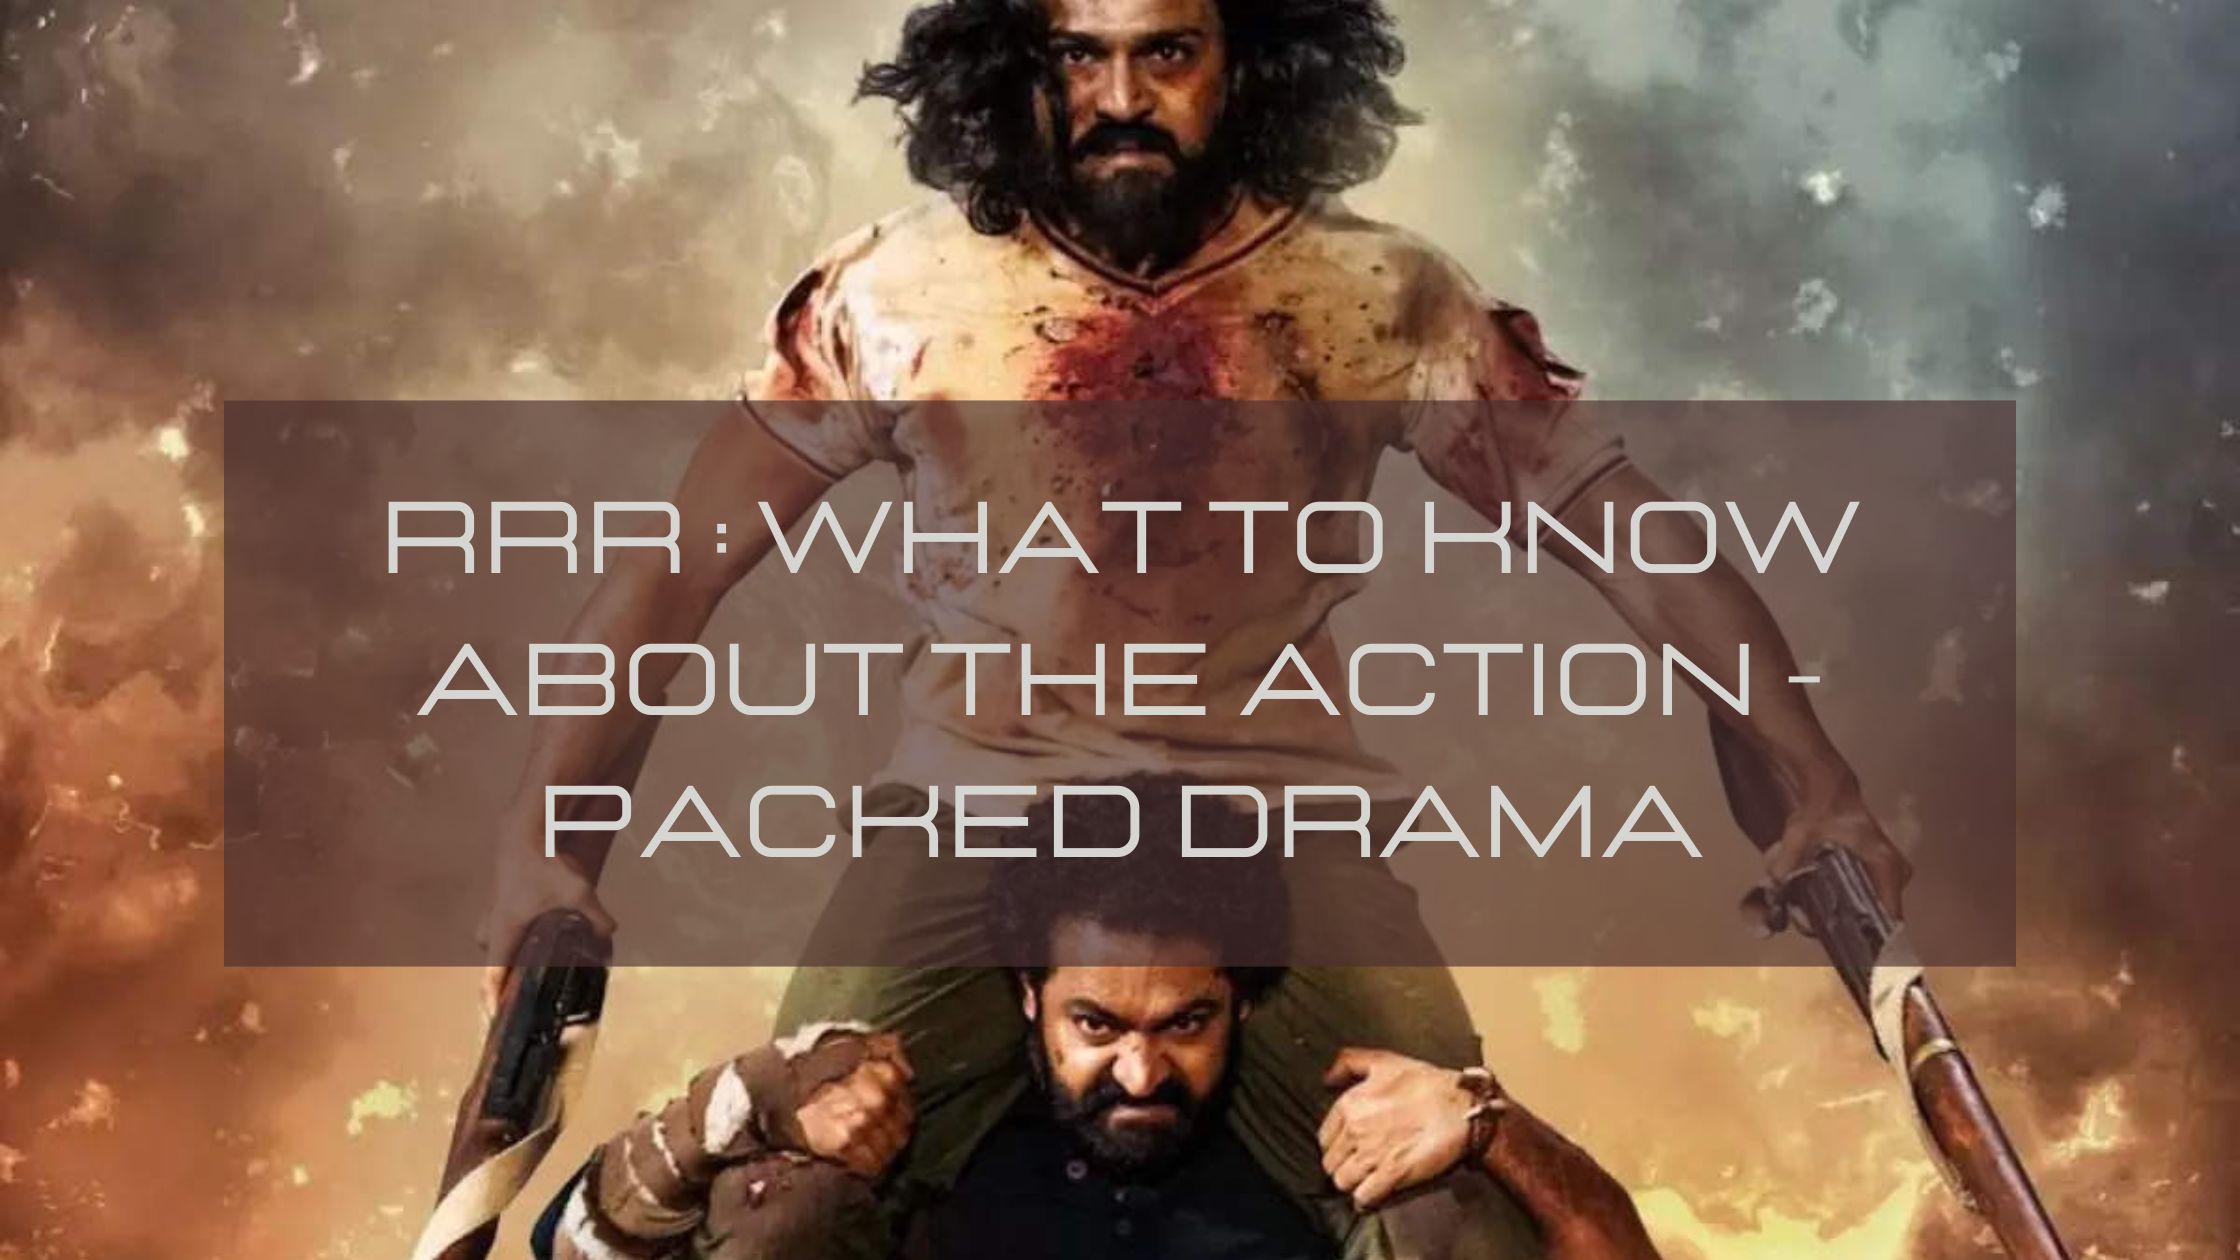 RRR: What to know about the action-packed drama